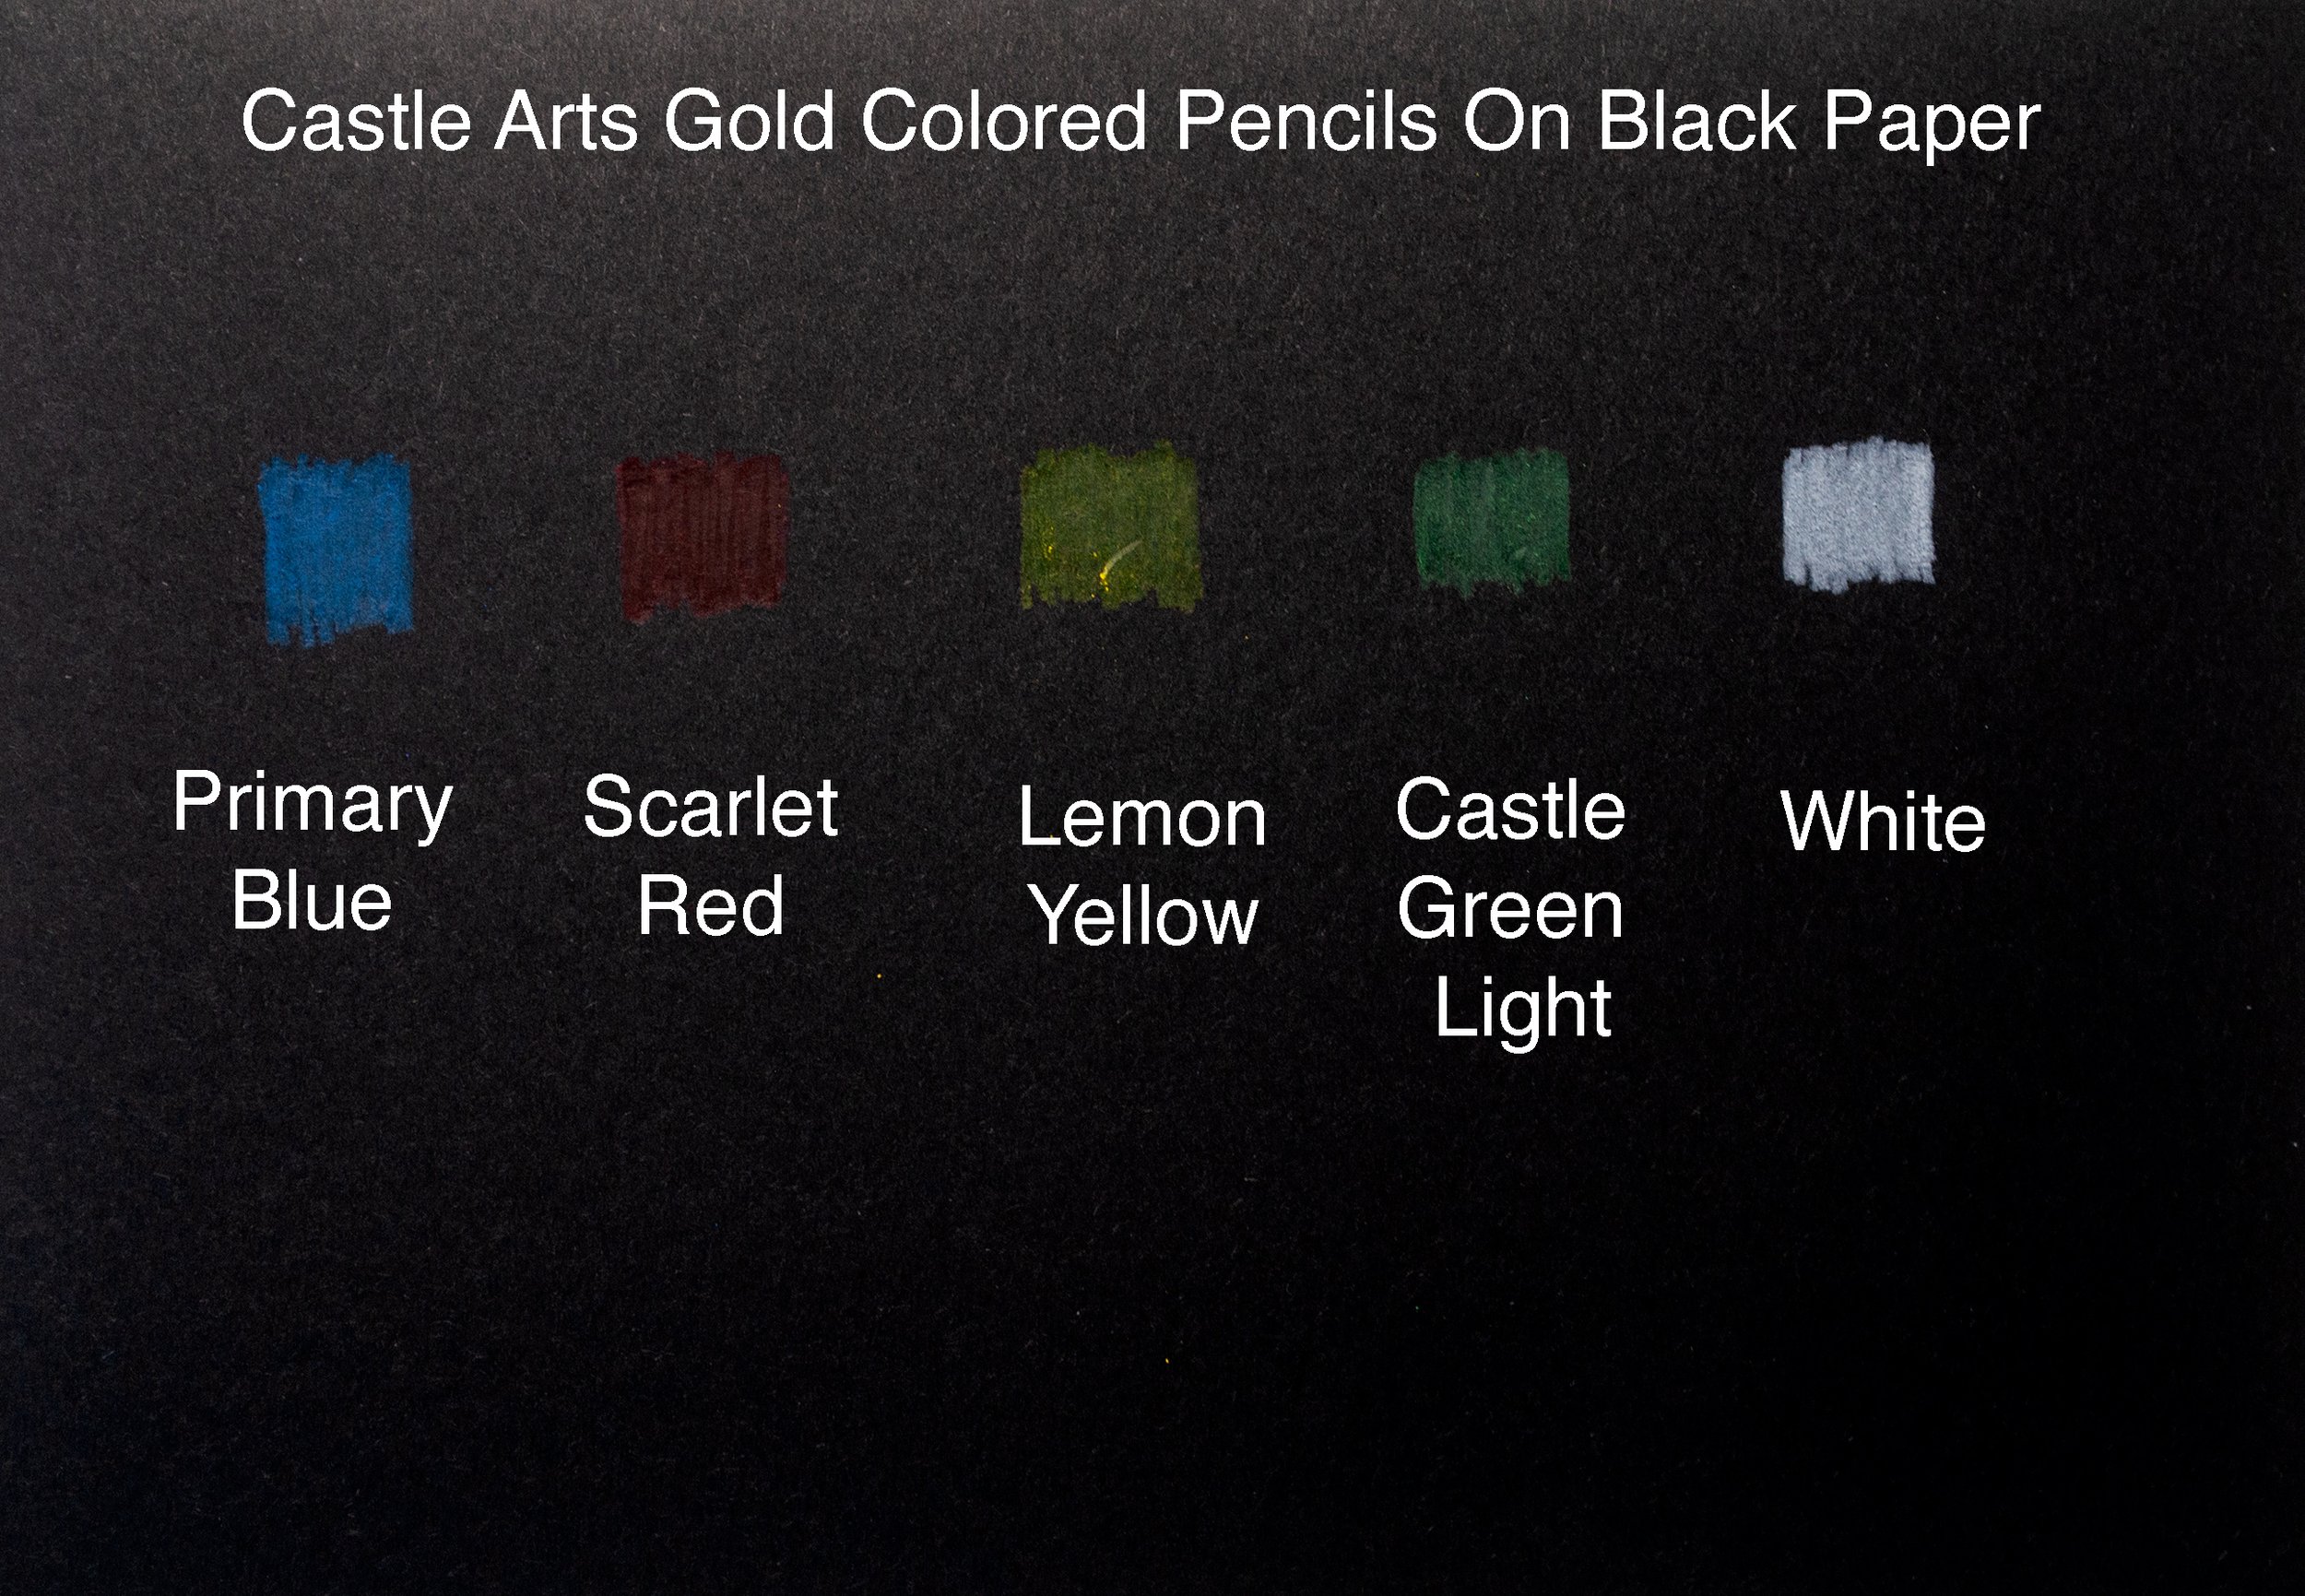 Castle Art Supplies Gold Standard 120 Coloring Pencils Set with Extras  Oil-based Colored Cores Stay Sharper, Tougher Against Breakage, For Adult  Artists, Colorists